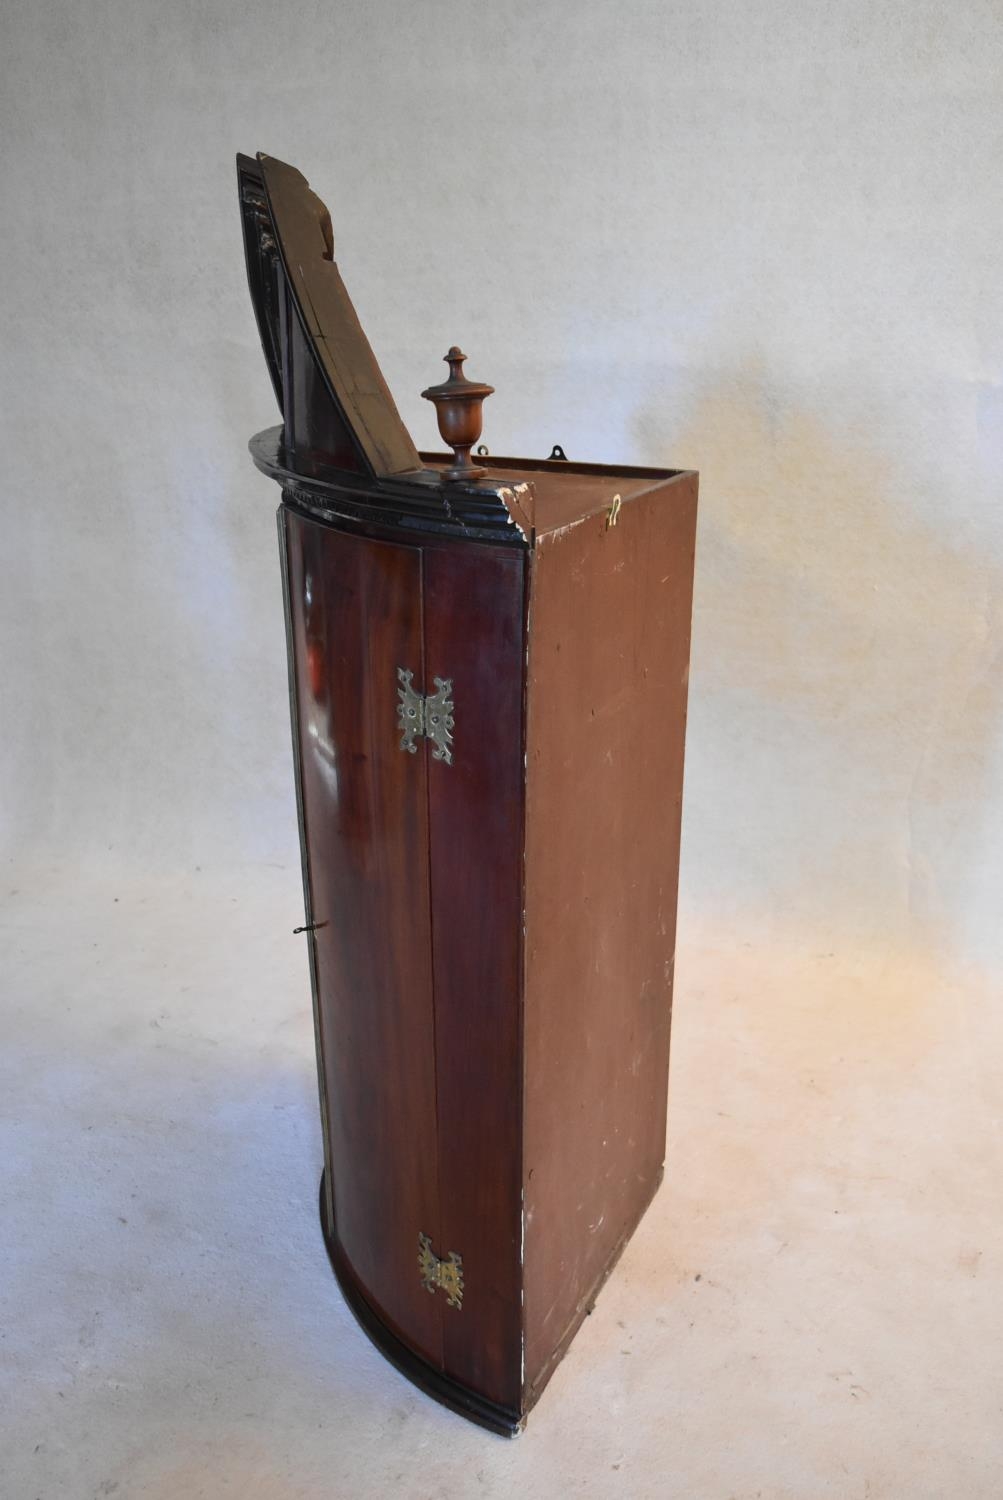 A Georgian mahogany bowfronted hanging corner cabinet with arched pediment and urn finials and - Image 8 of 10